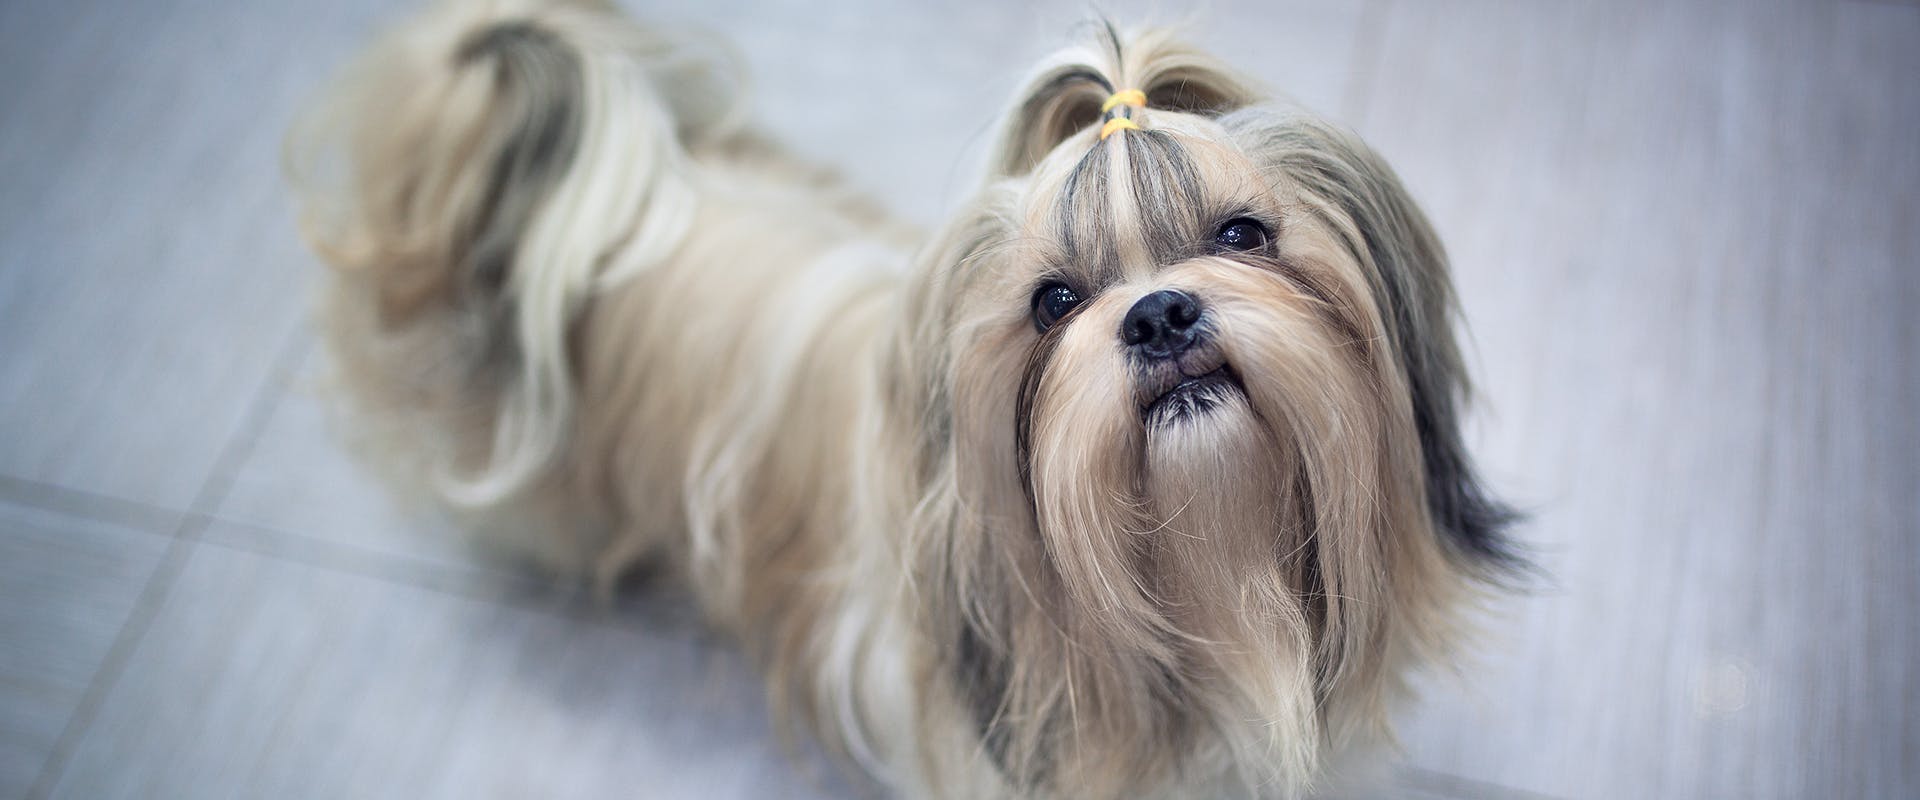 A Shih Tzu with a topknot standing on a laminate floor